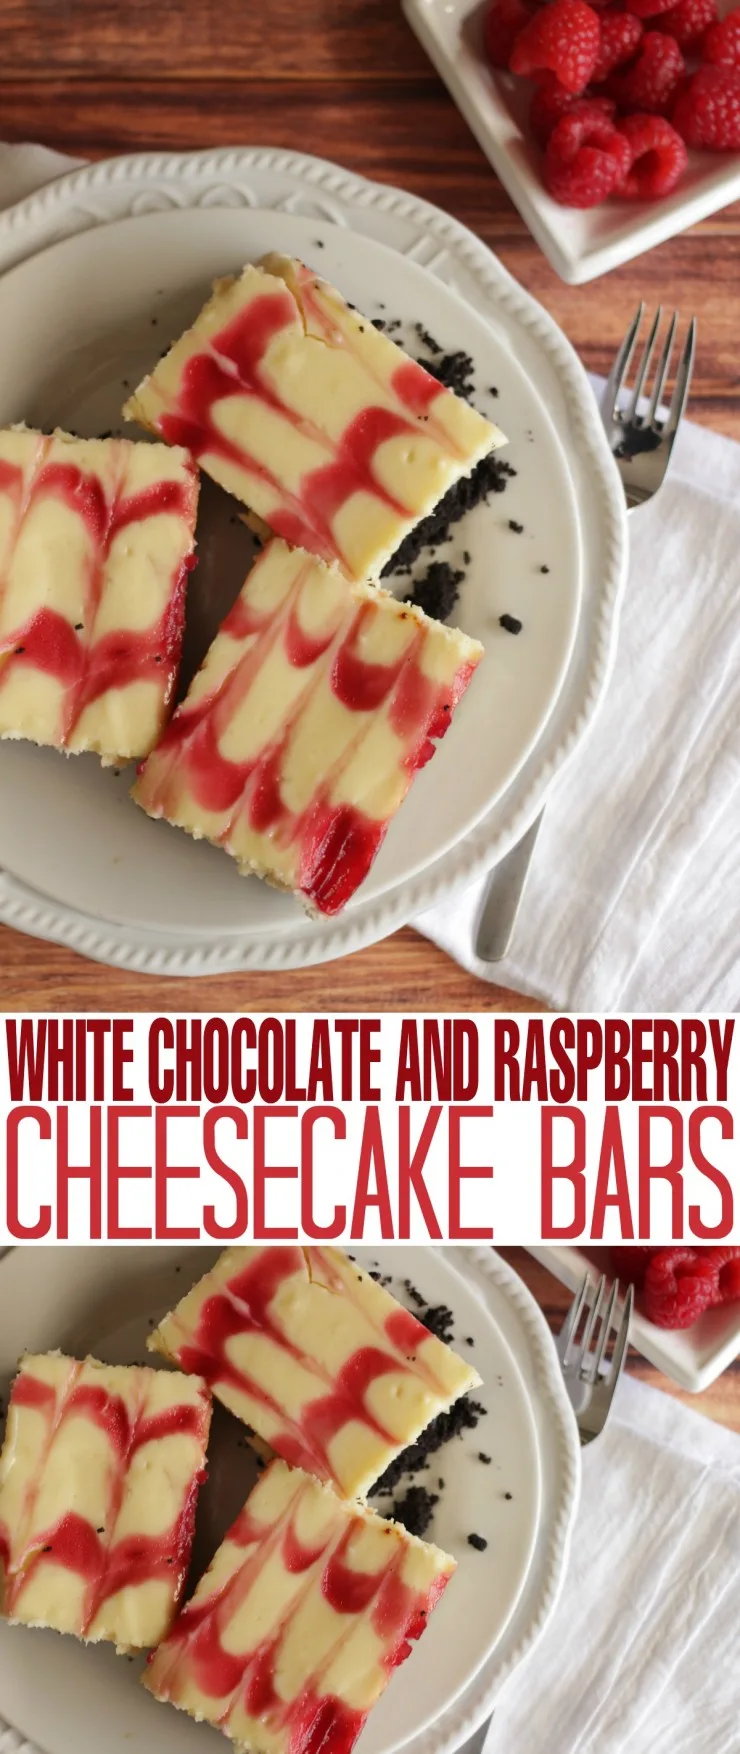 These White Chocolate and Raspberry Cheesecake Bars are a rich dessert made with fresh raspberries!